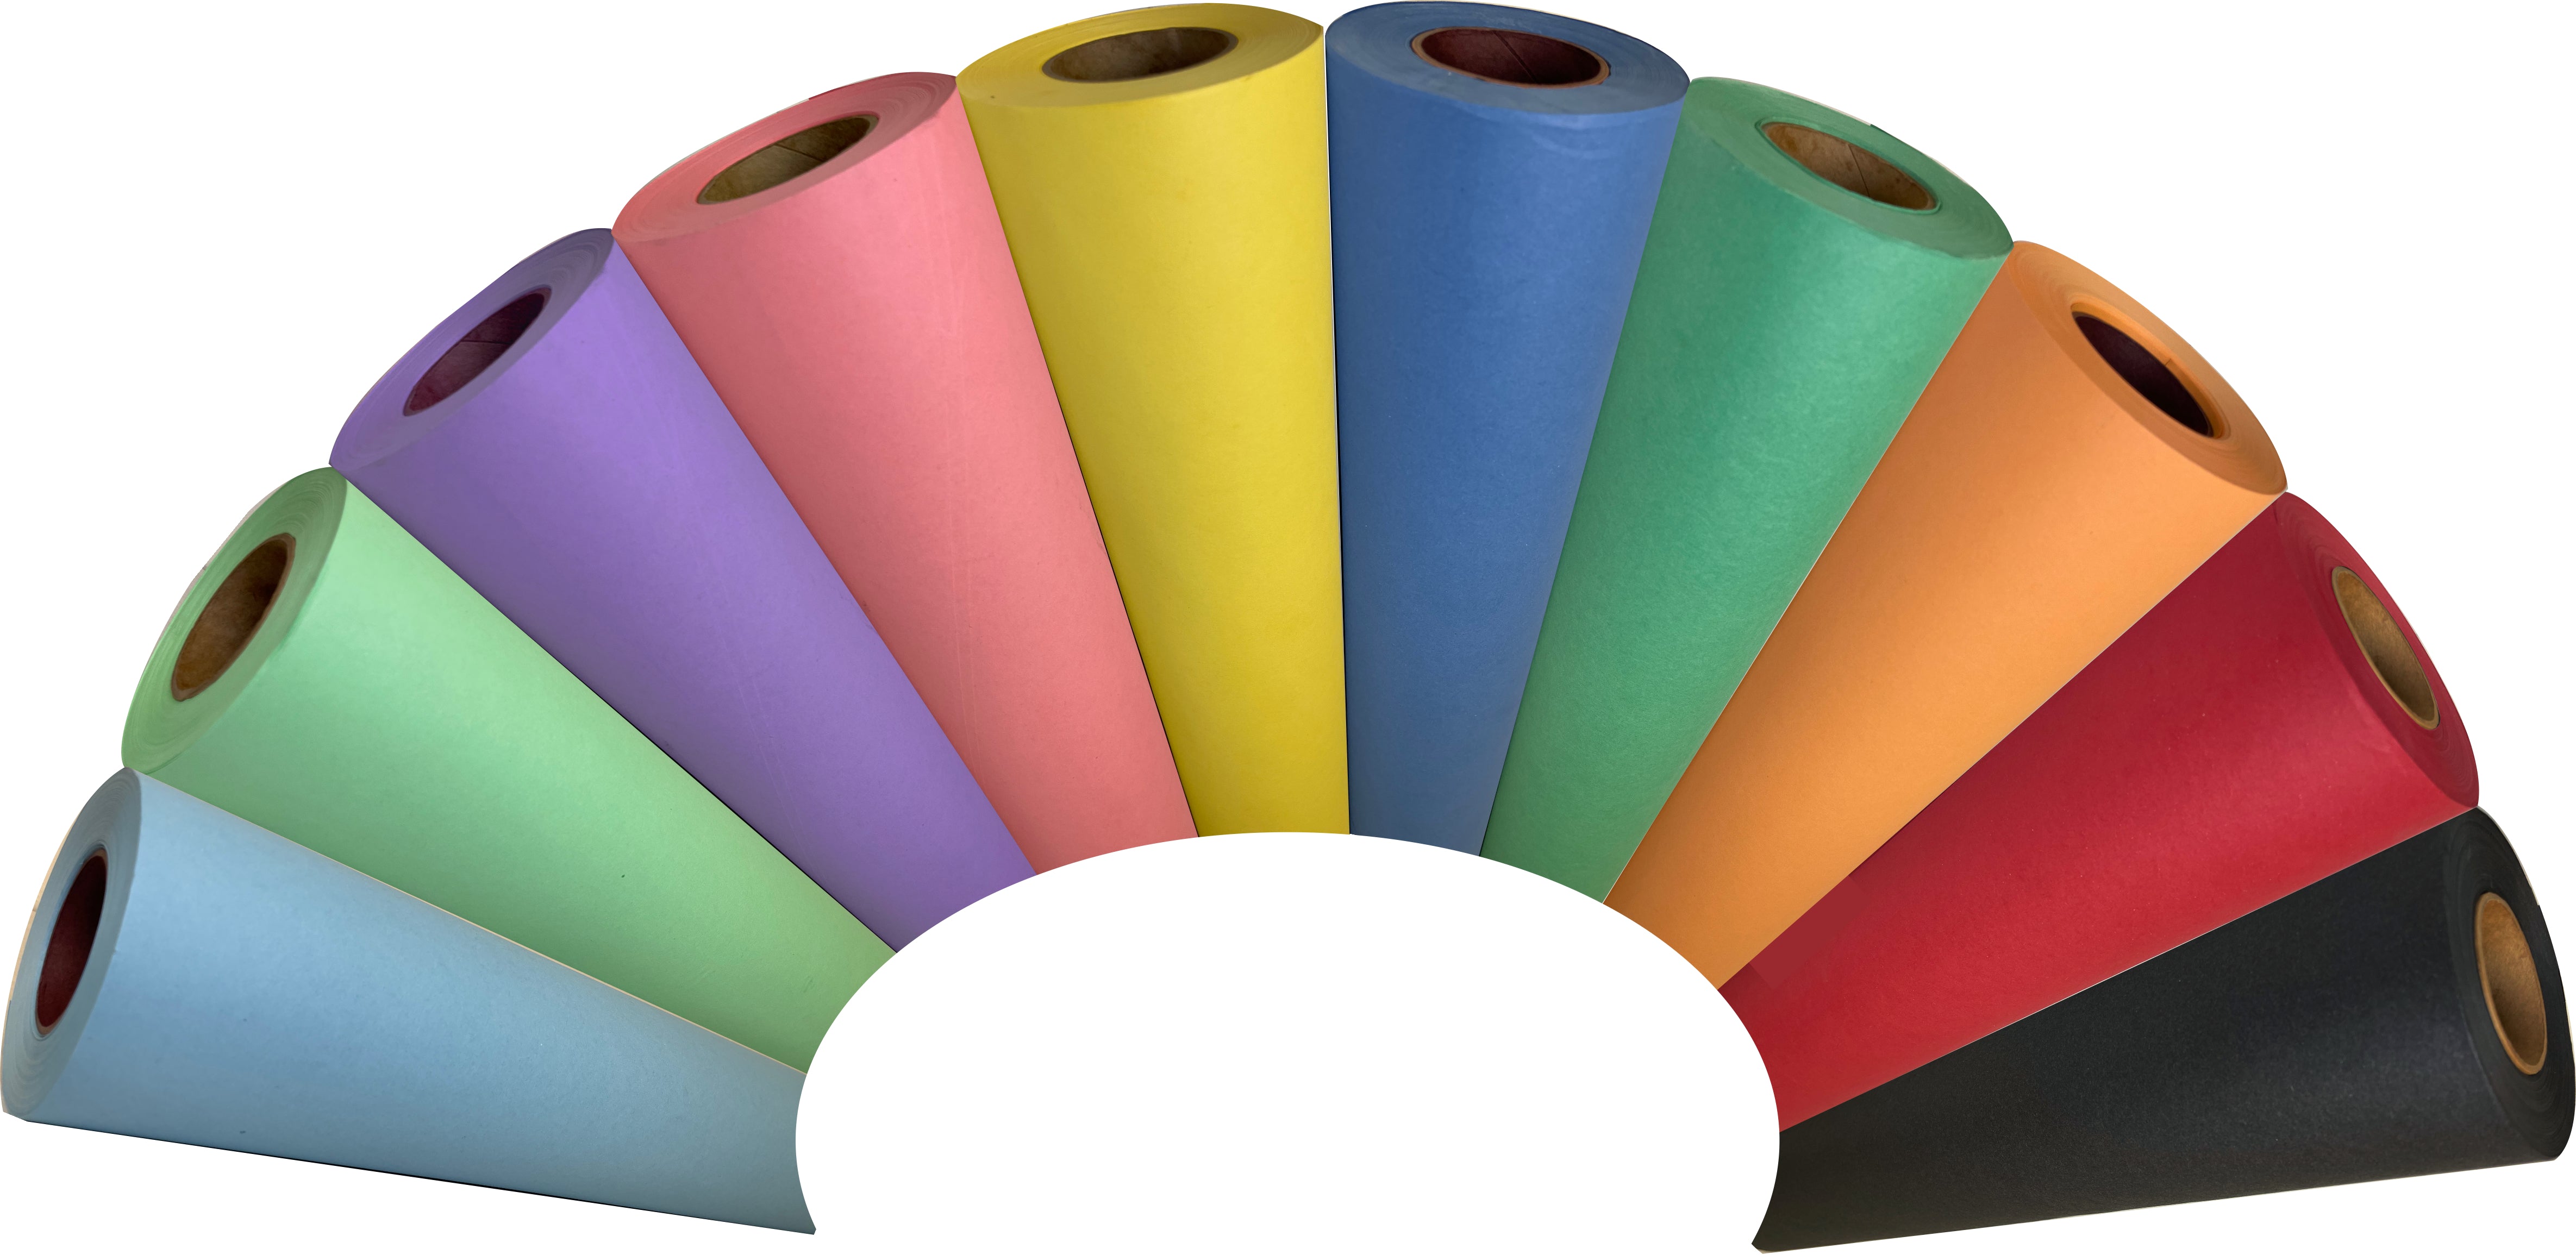 Here you will find our Famous Butcher Paper, Freezer Paper, and White, Natural, and Colored Kraft Paper Rolls